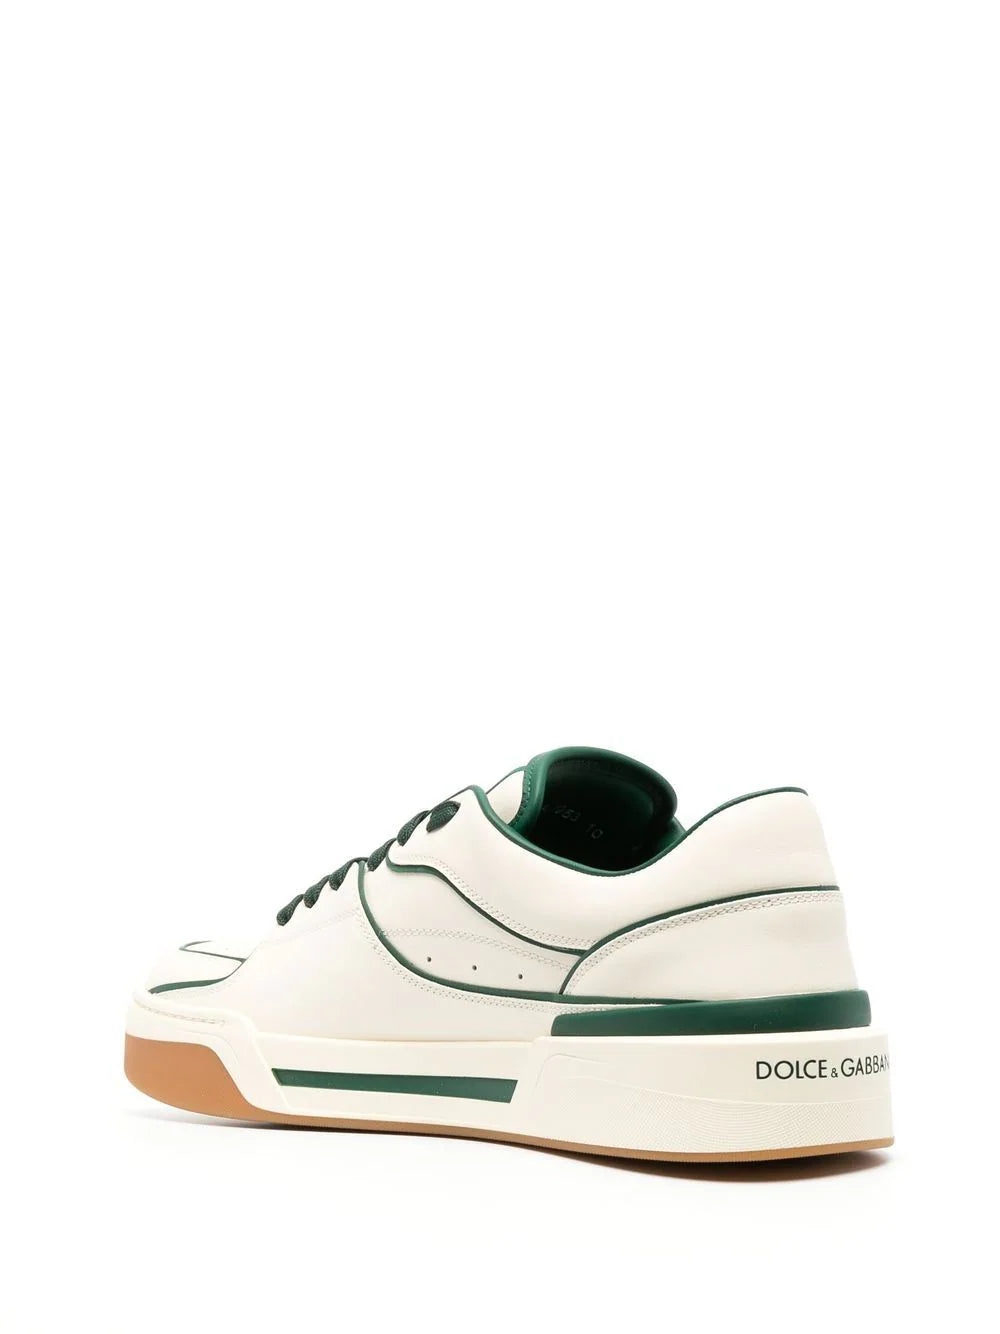 DOLCE AND GABBANA    New Roma tennis shoes